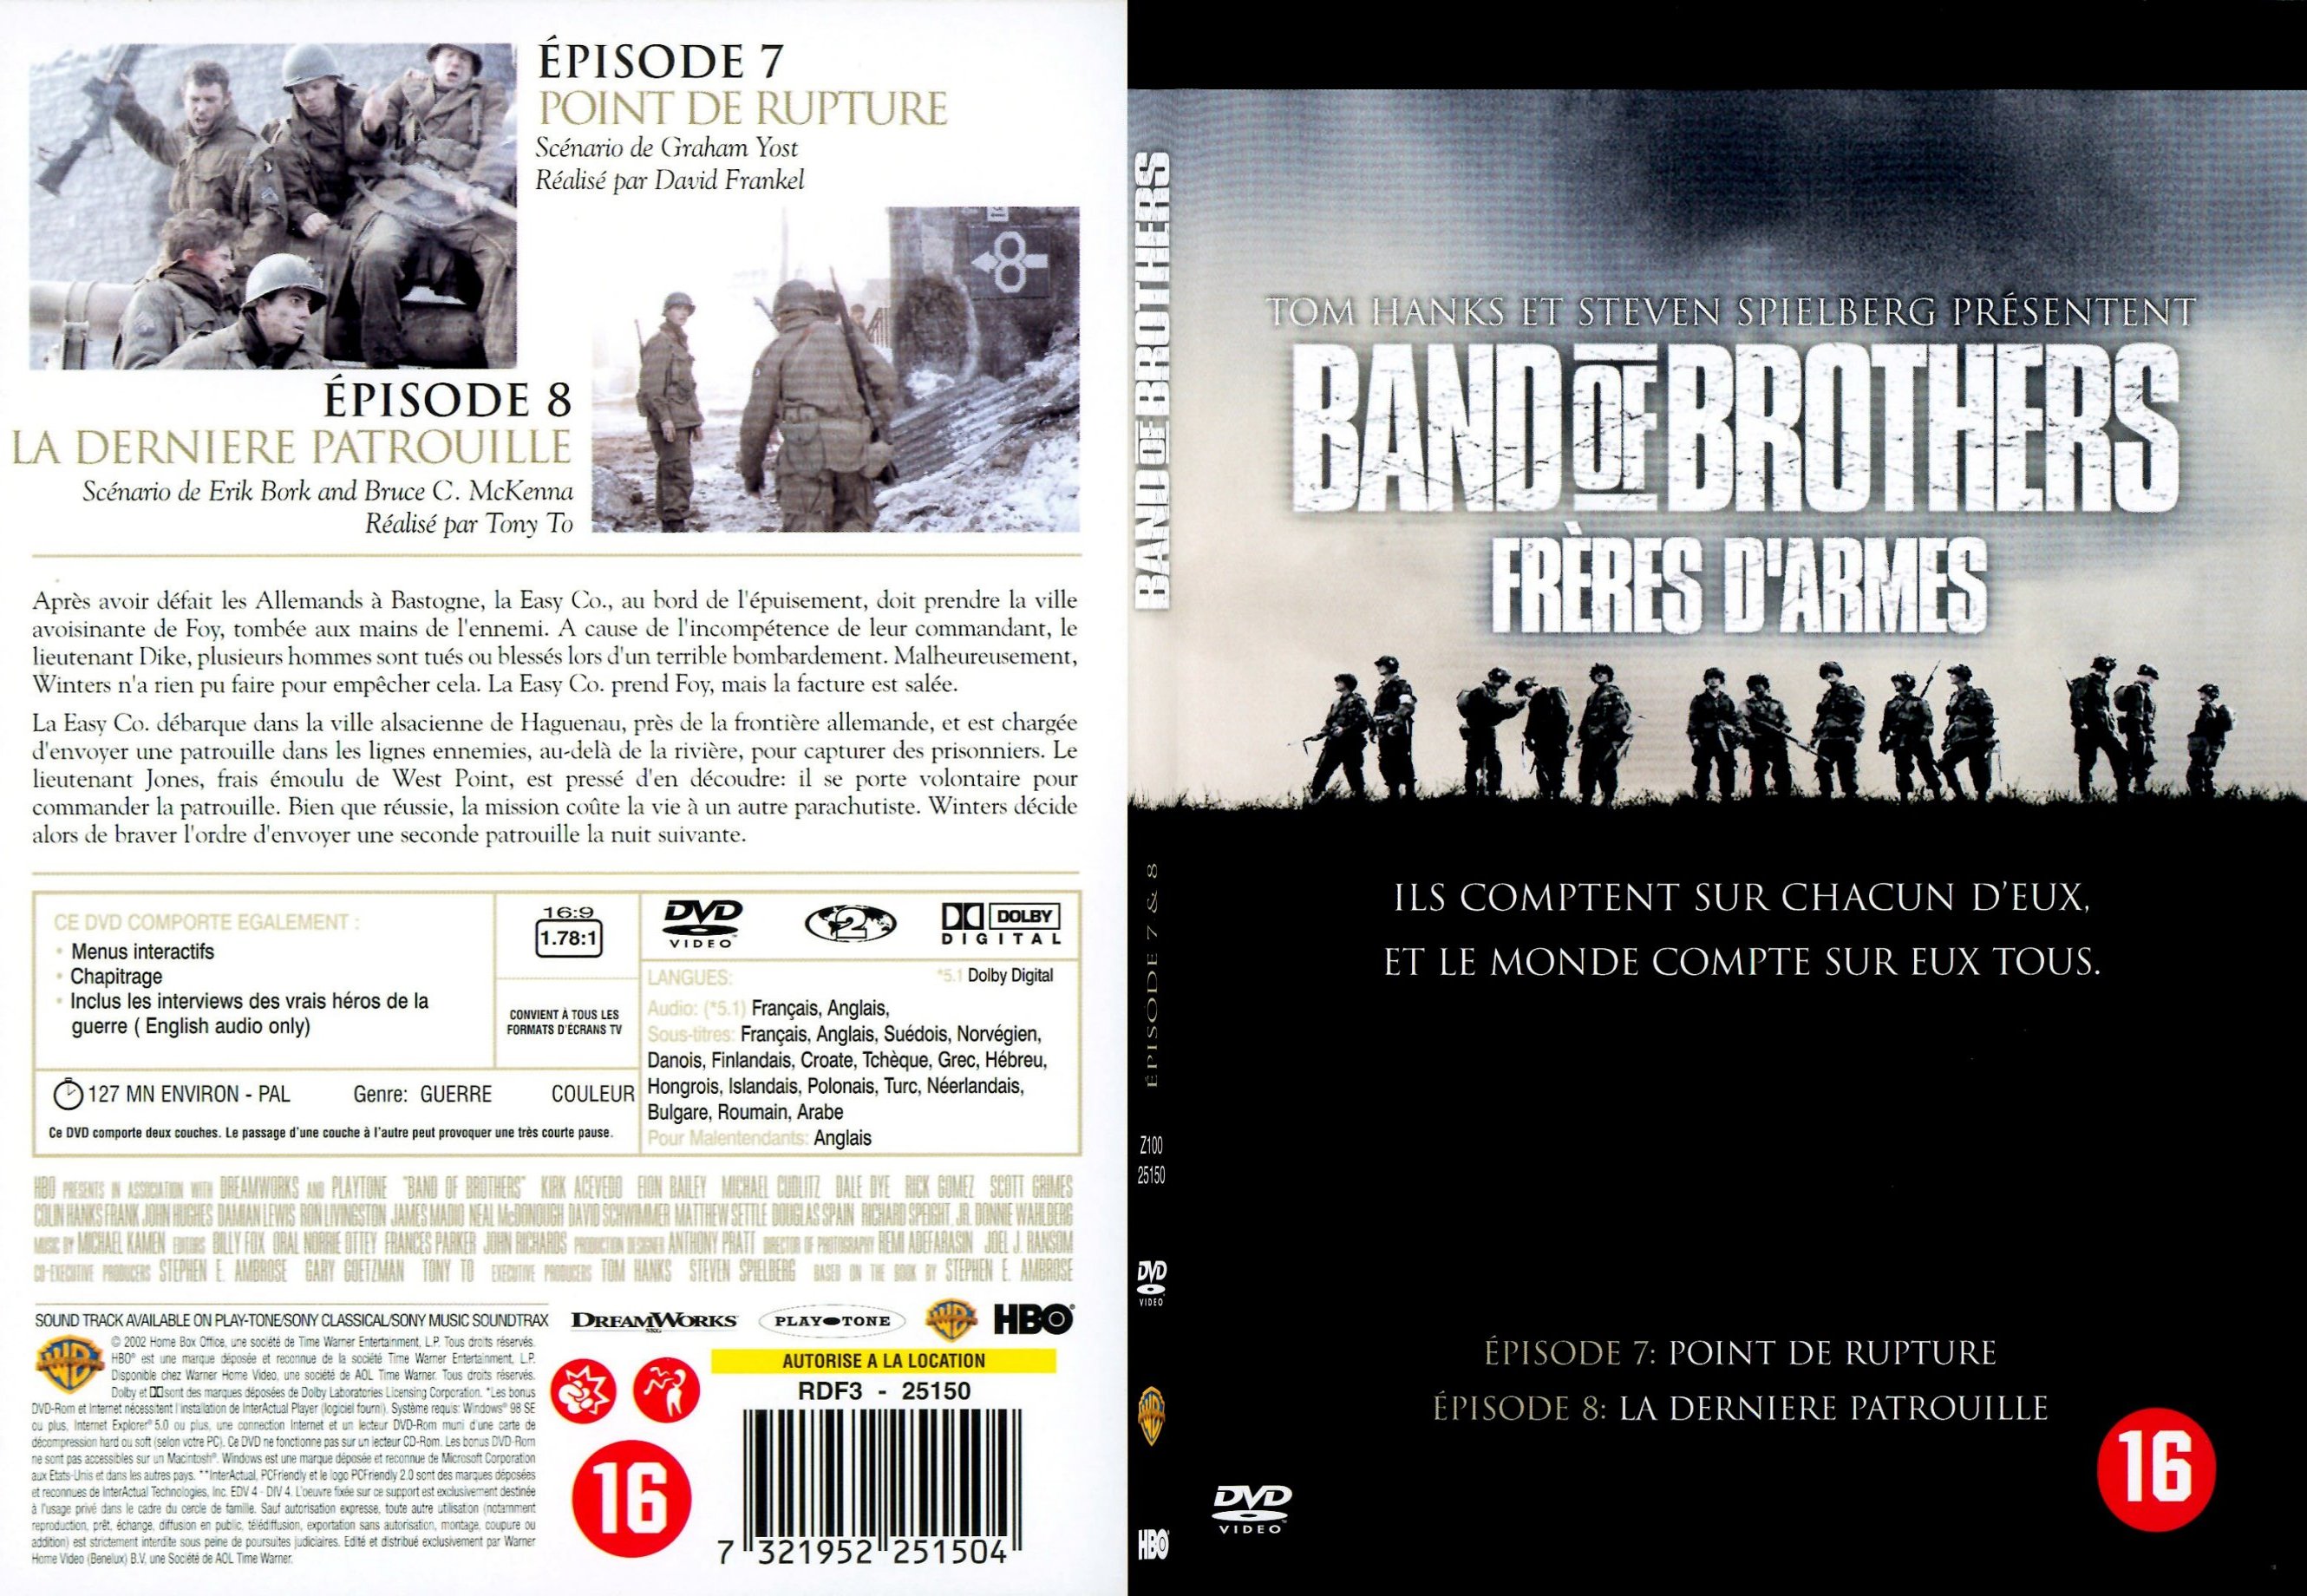 Jaquette DVD Band of brothers vol 4 - SLIM